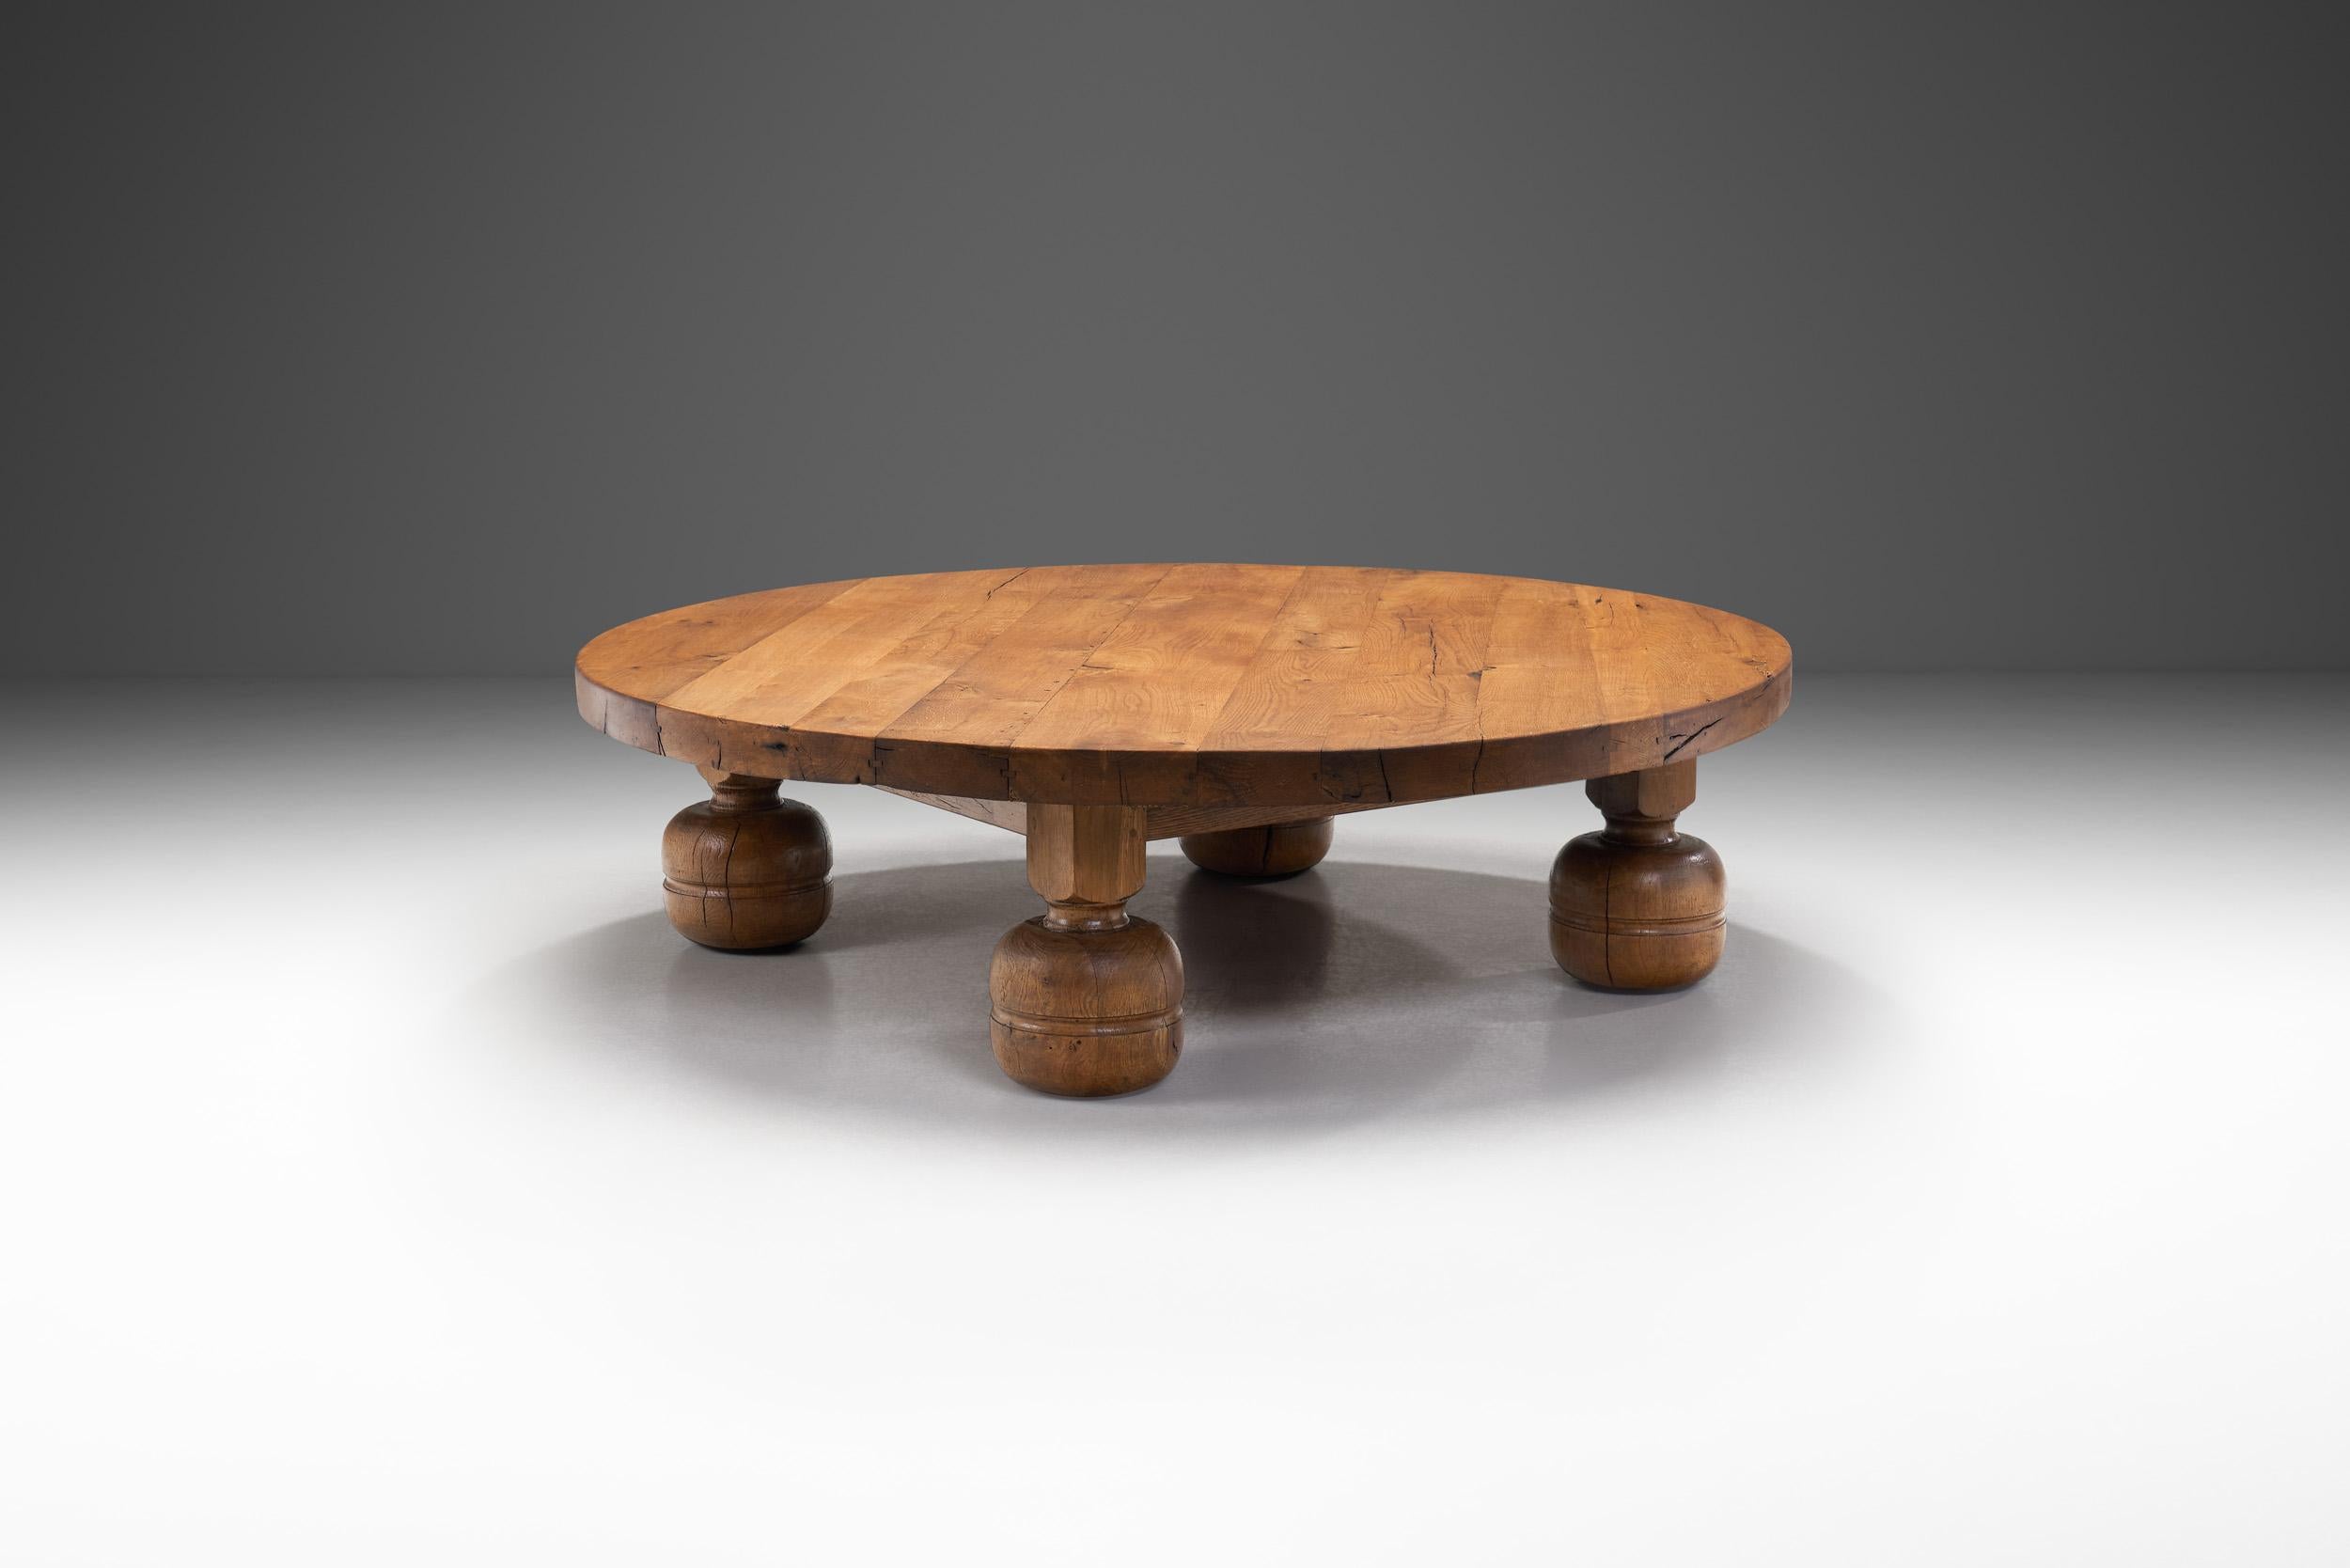 In European mid-century design, there are some common elements that define the continent’s furniture design of the era. Most importantly, there was an early emphasis on wood as it connected everyday objects, such as furniture, to nature. This